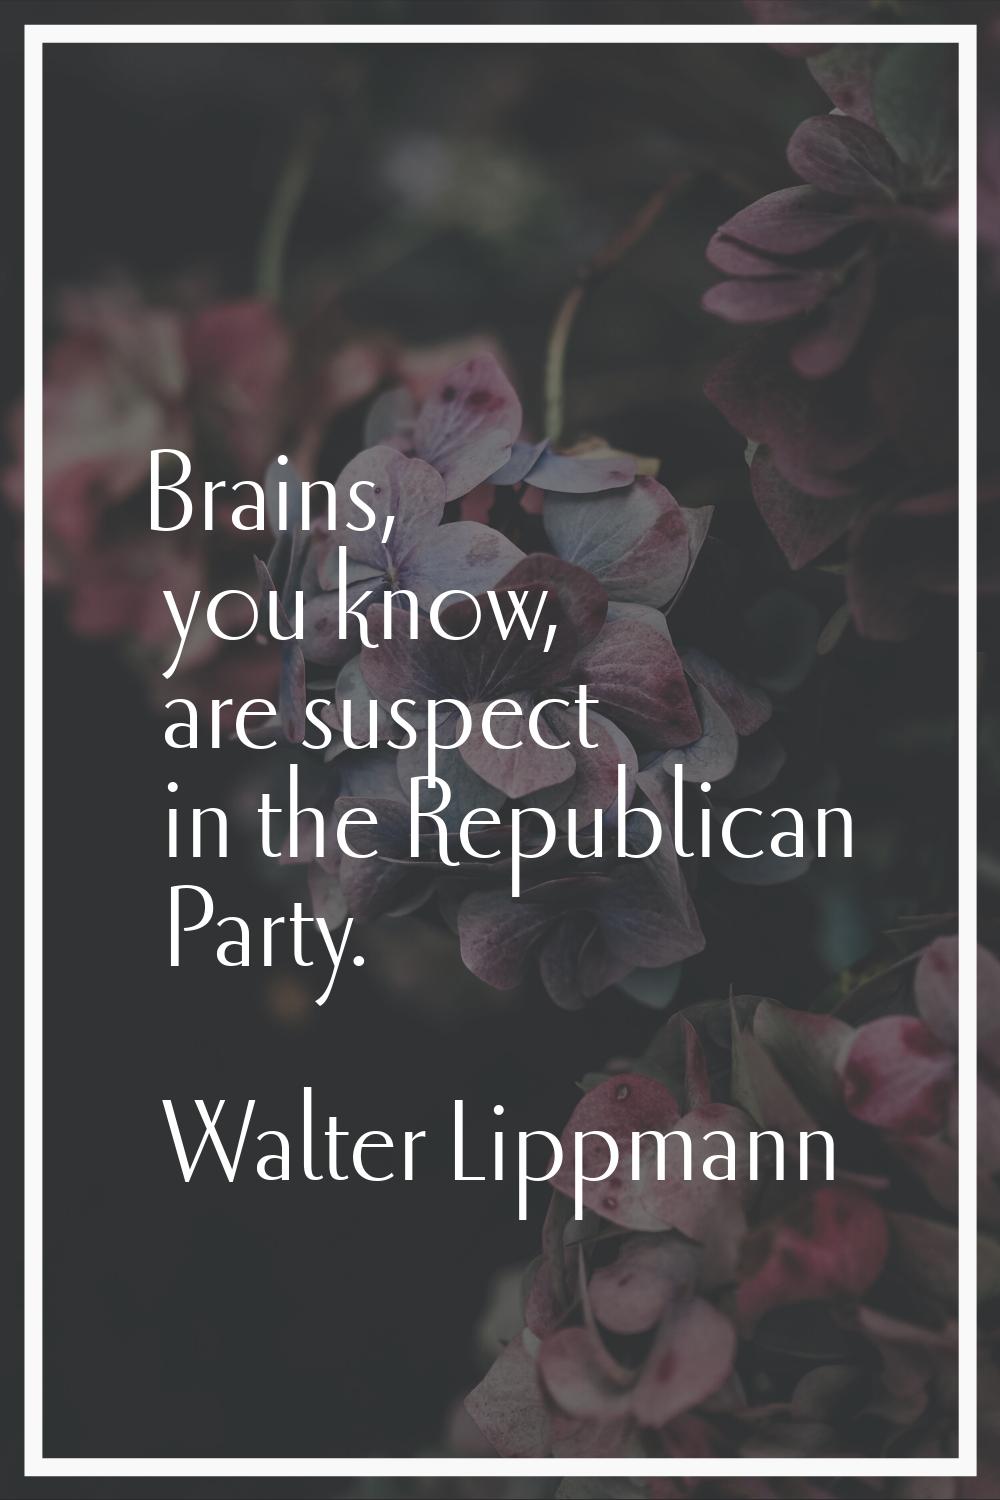 Brains, you know, are suspect in the Republican Party.